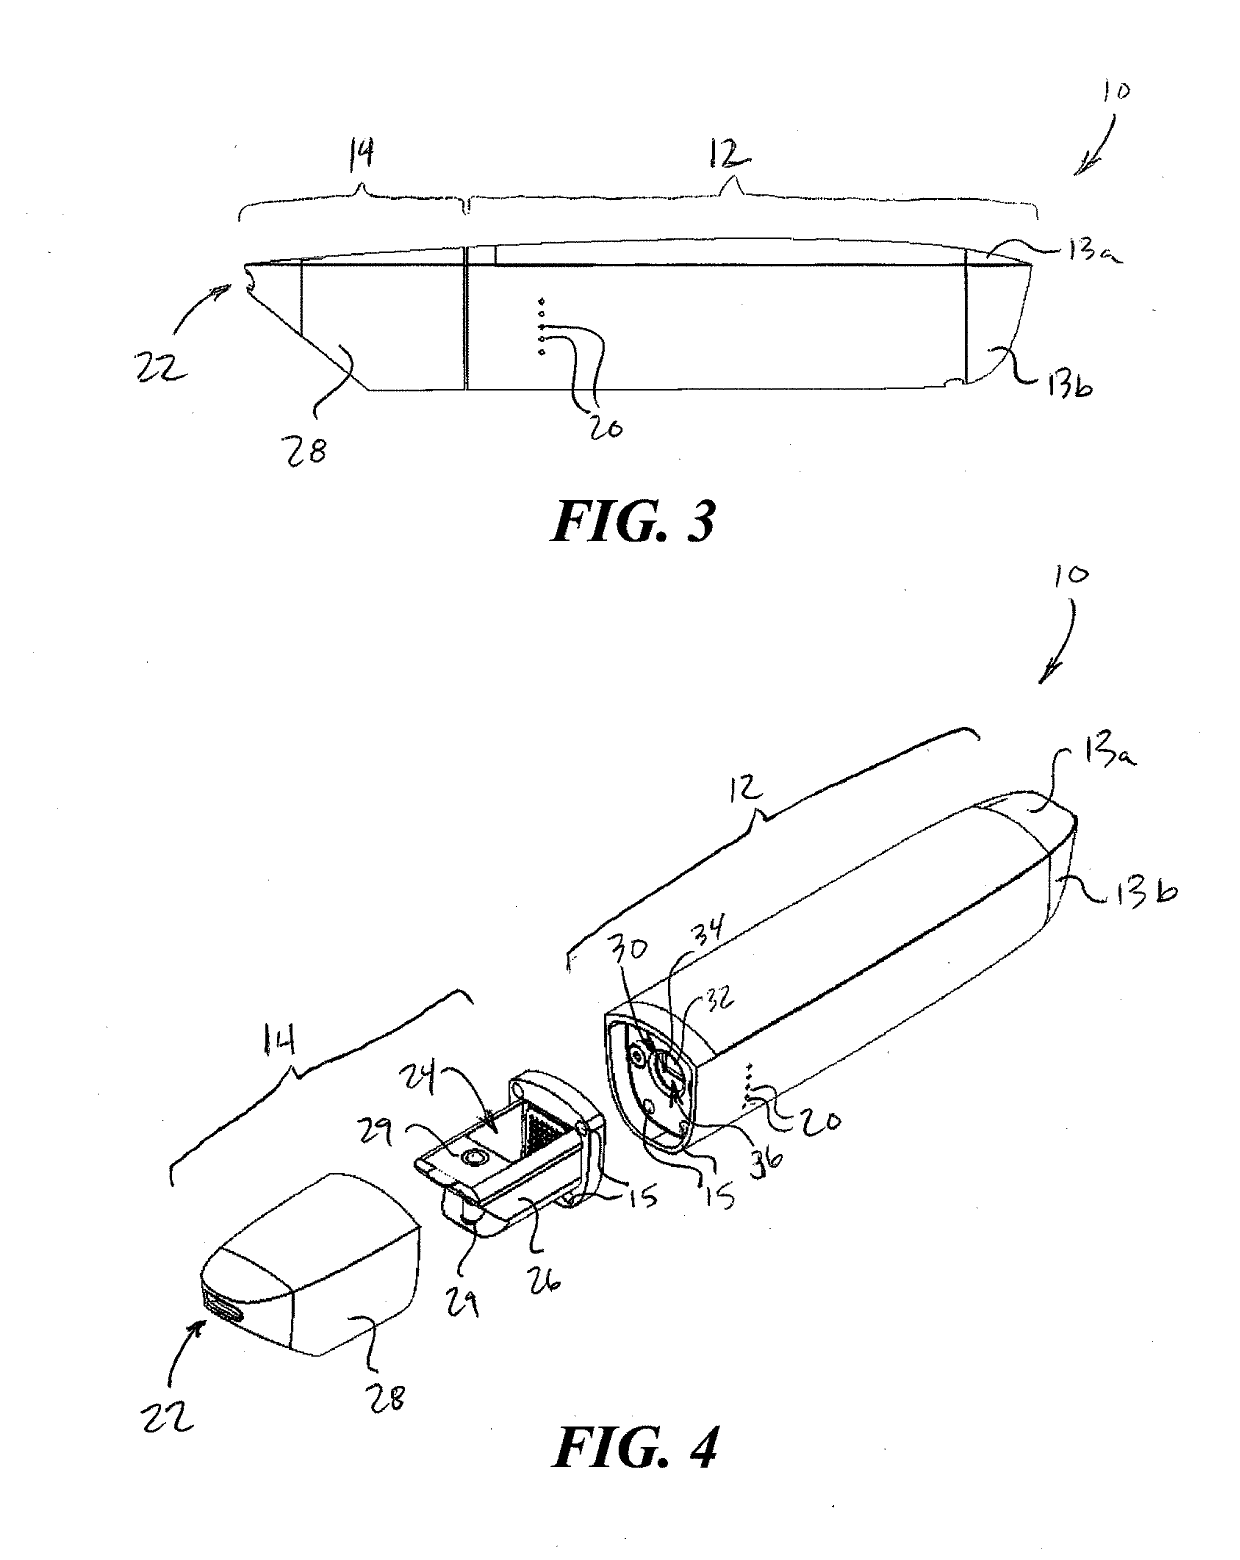 Vapor delivery systems and methods